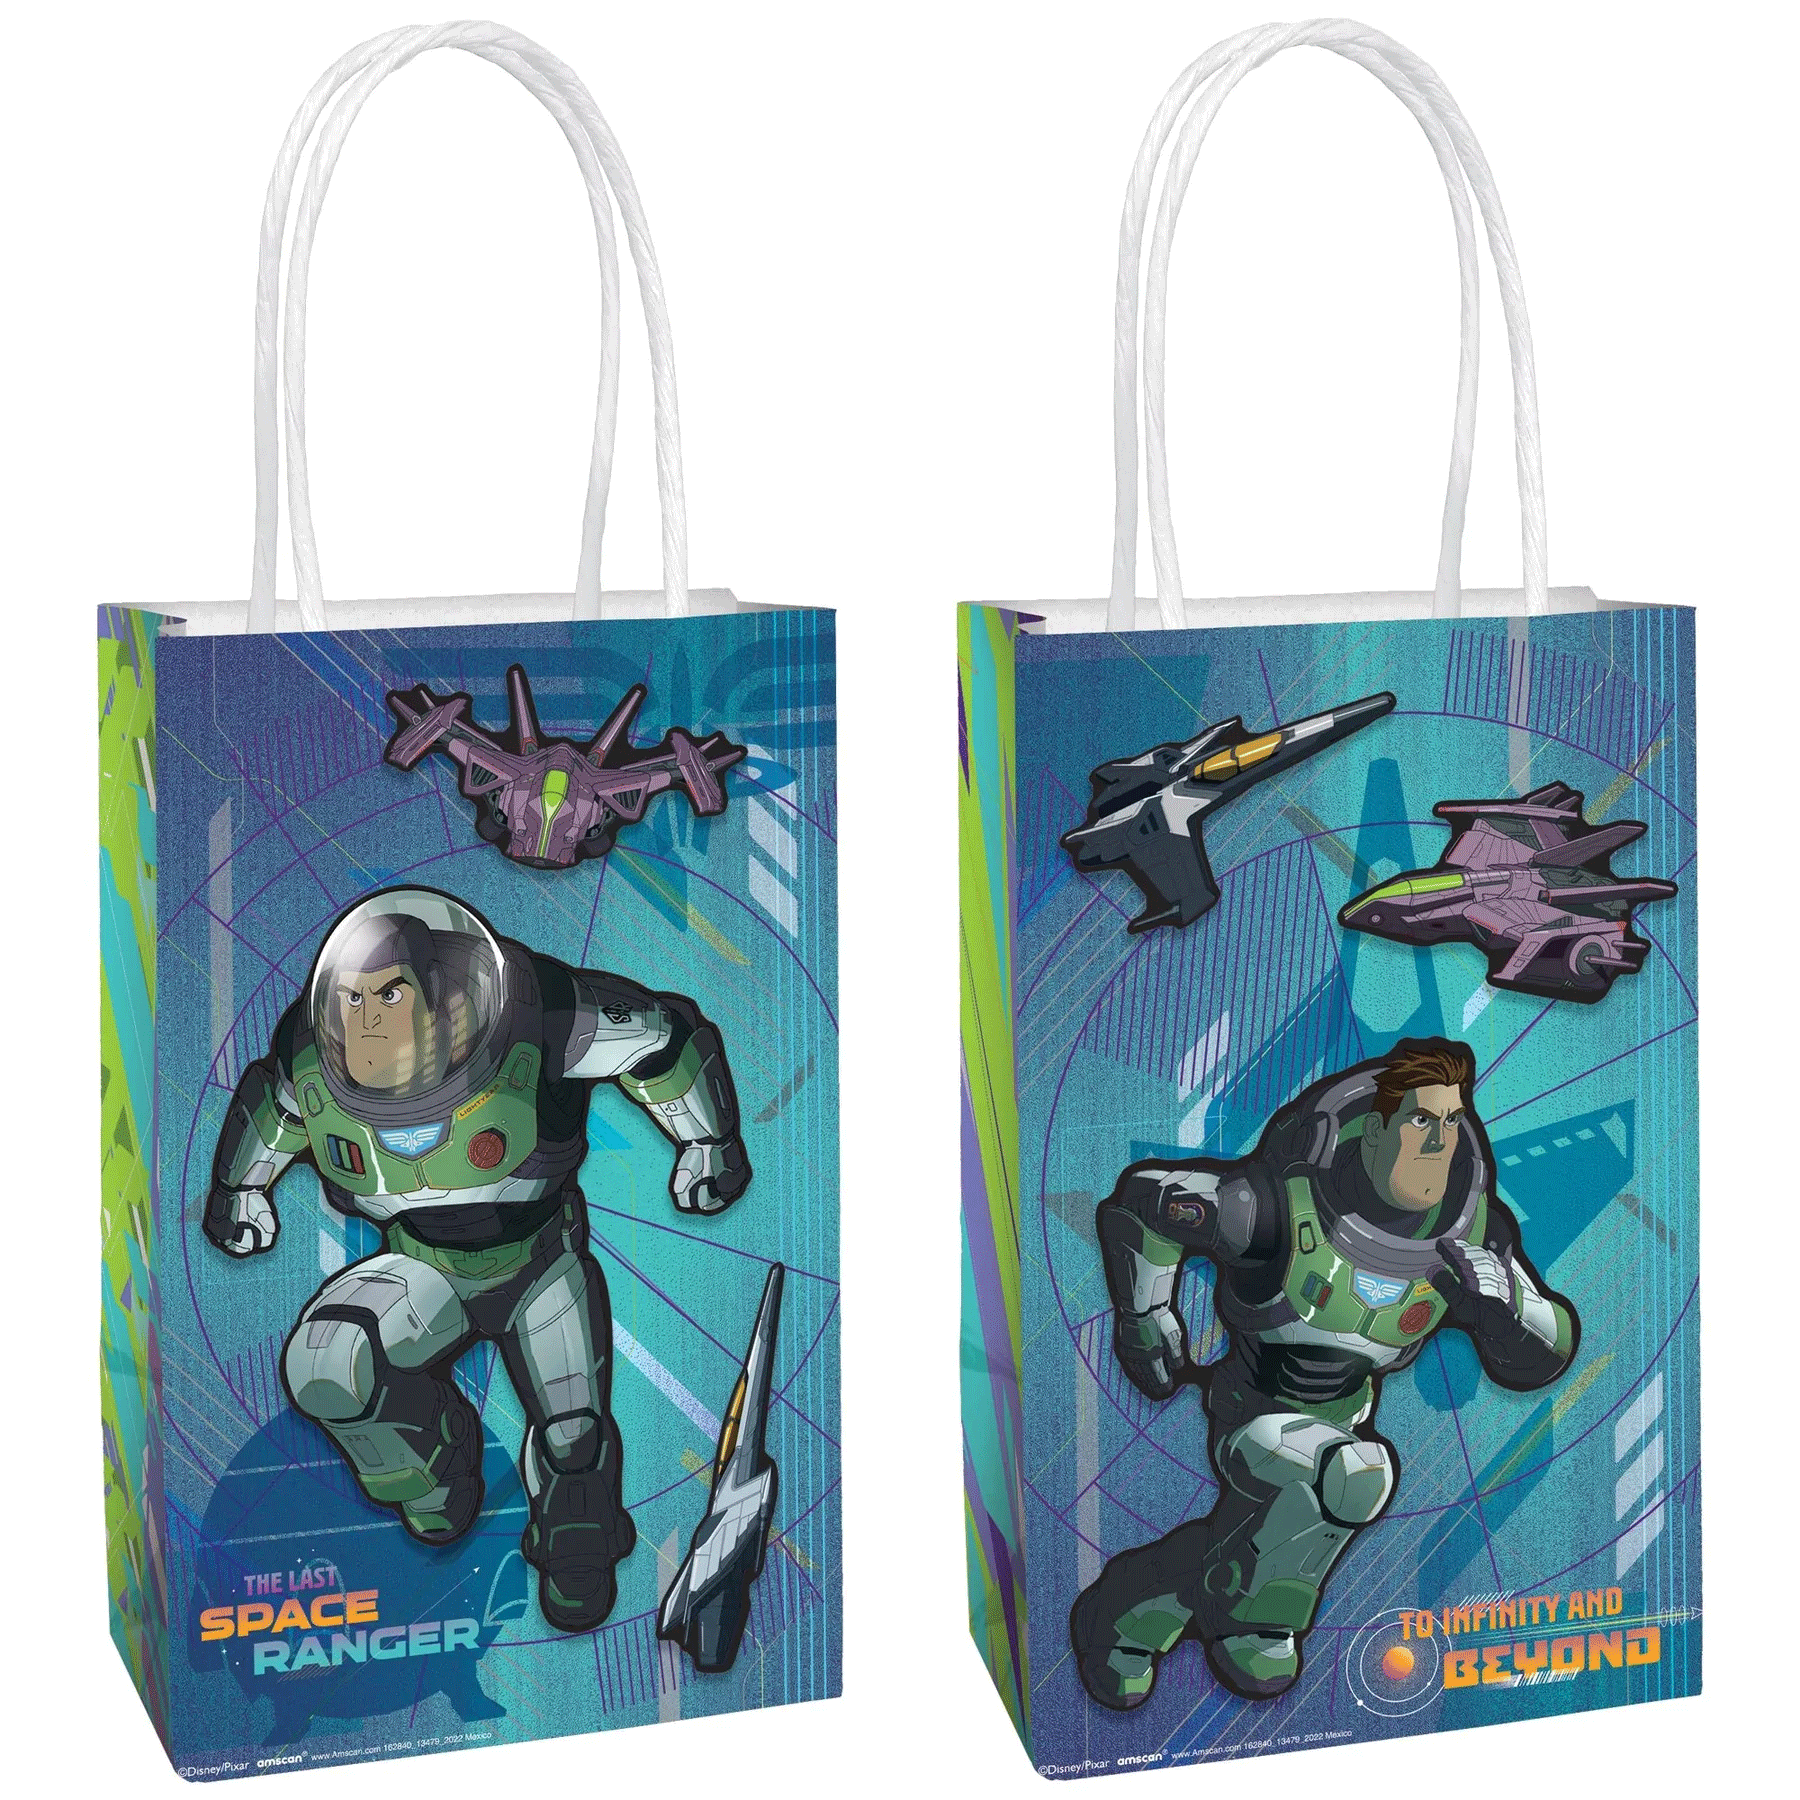 Buzz Lightyear Create Your Own Bags With Add-Ons